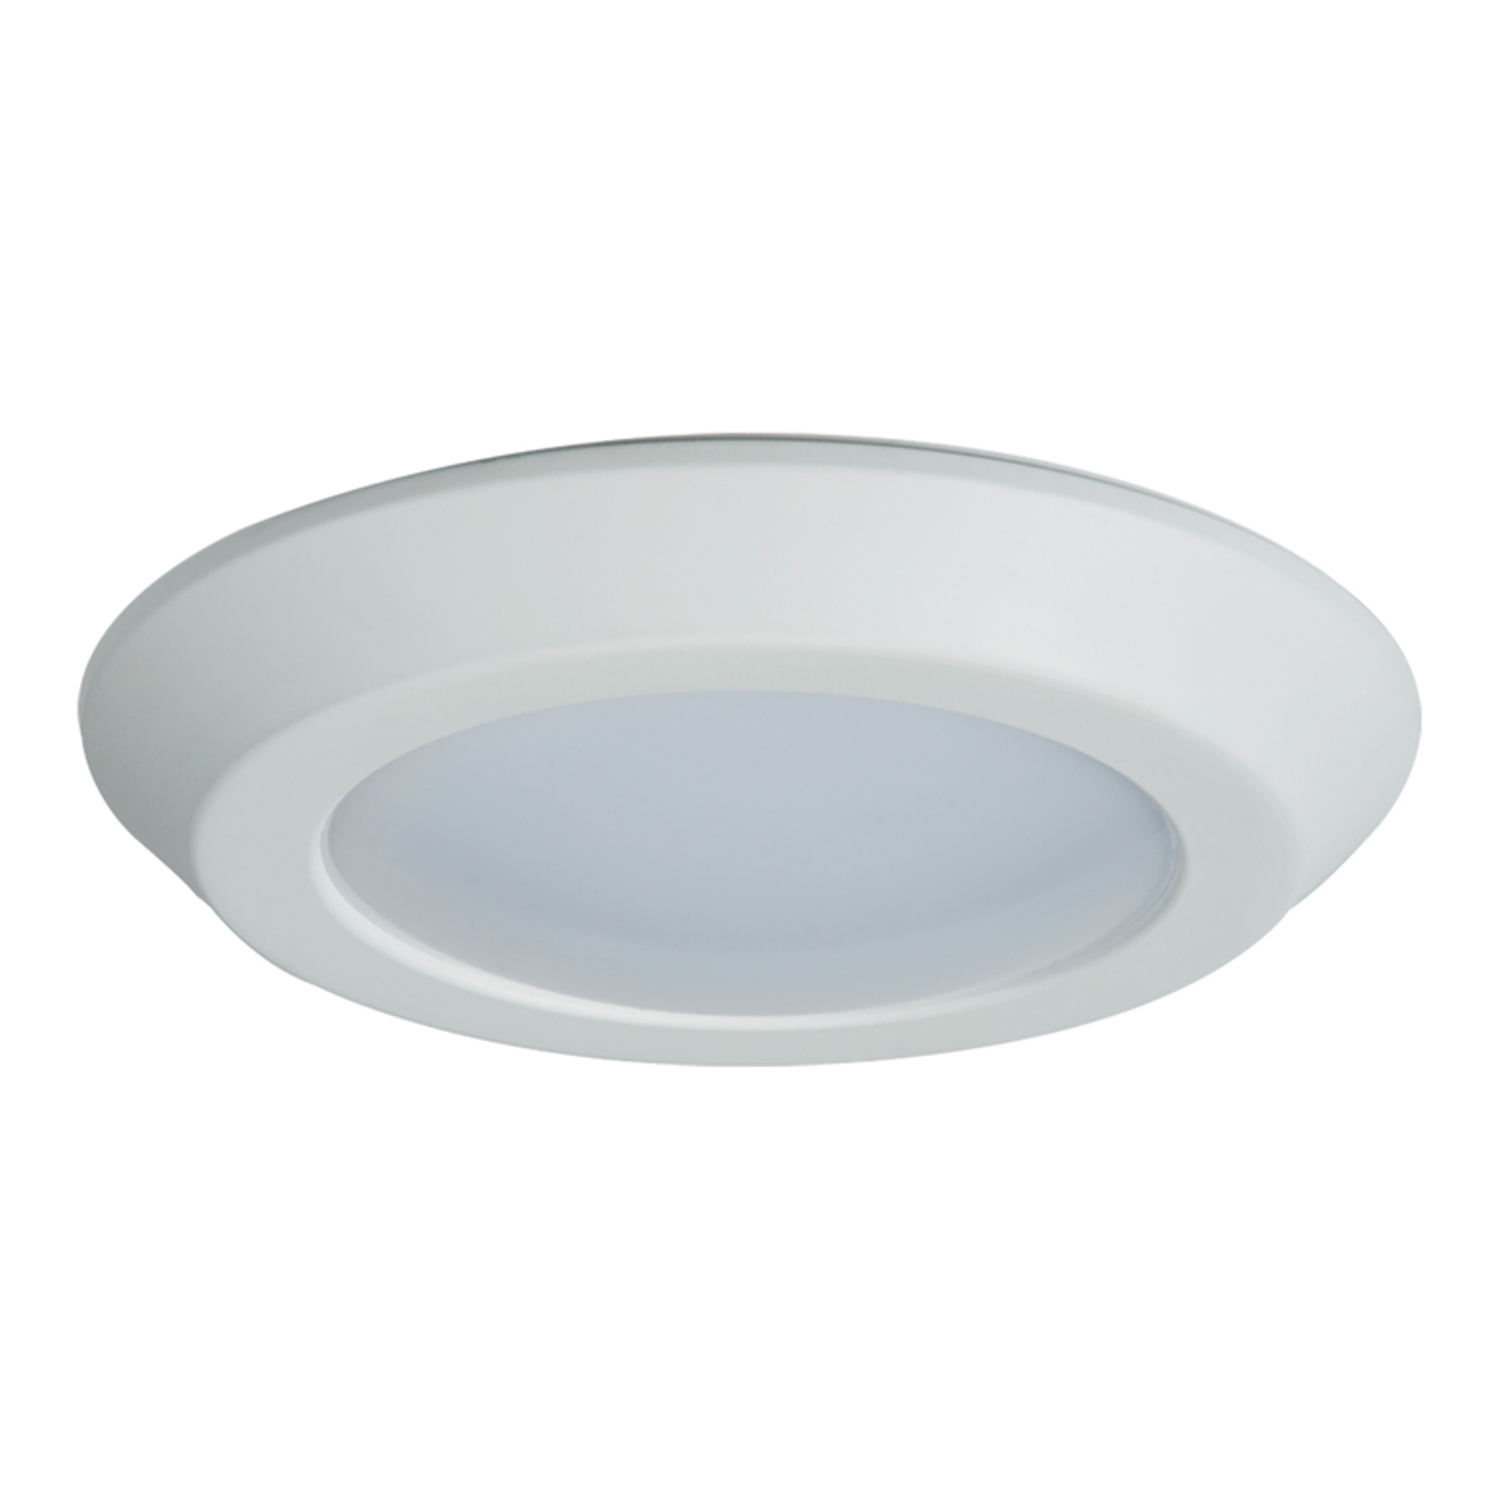 Halo BLD6 Series Matte White 6 in. W Aluminum LED Canless Recessed Downlight 10.3 W